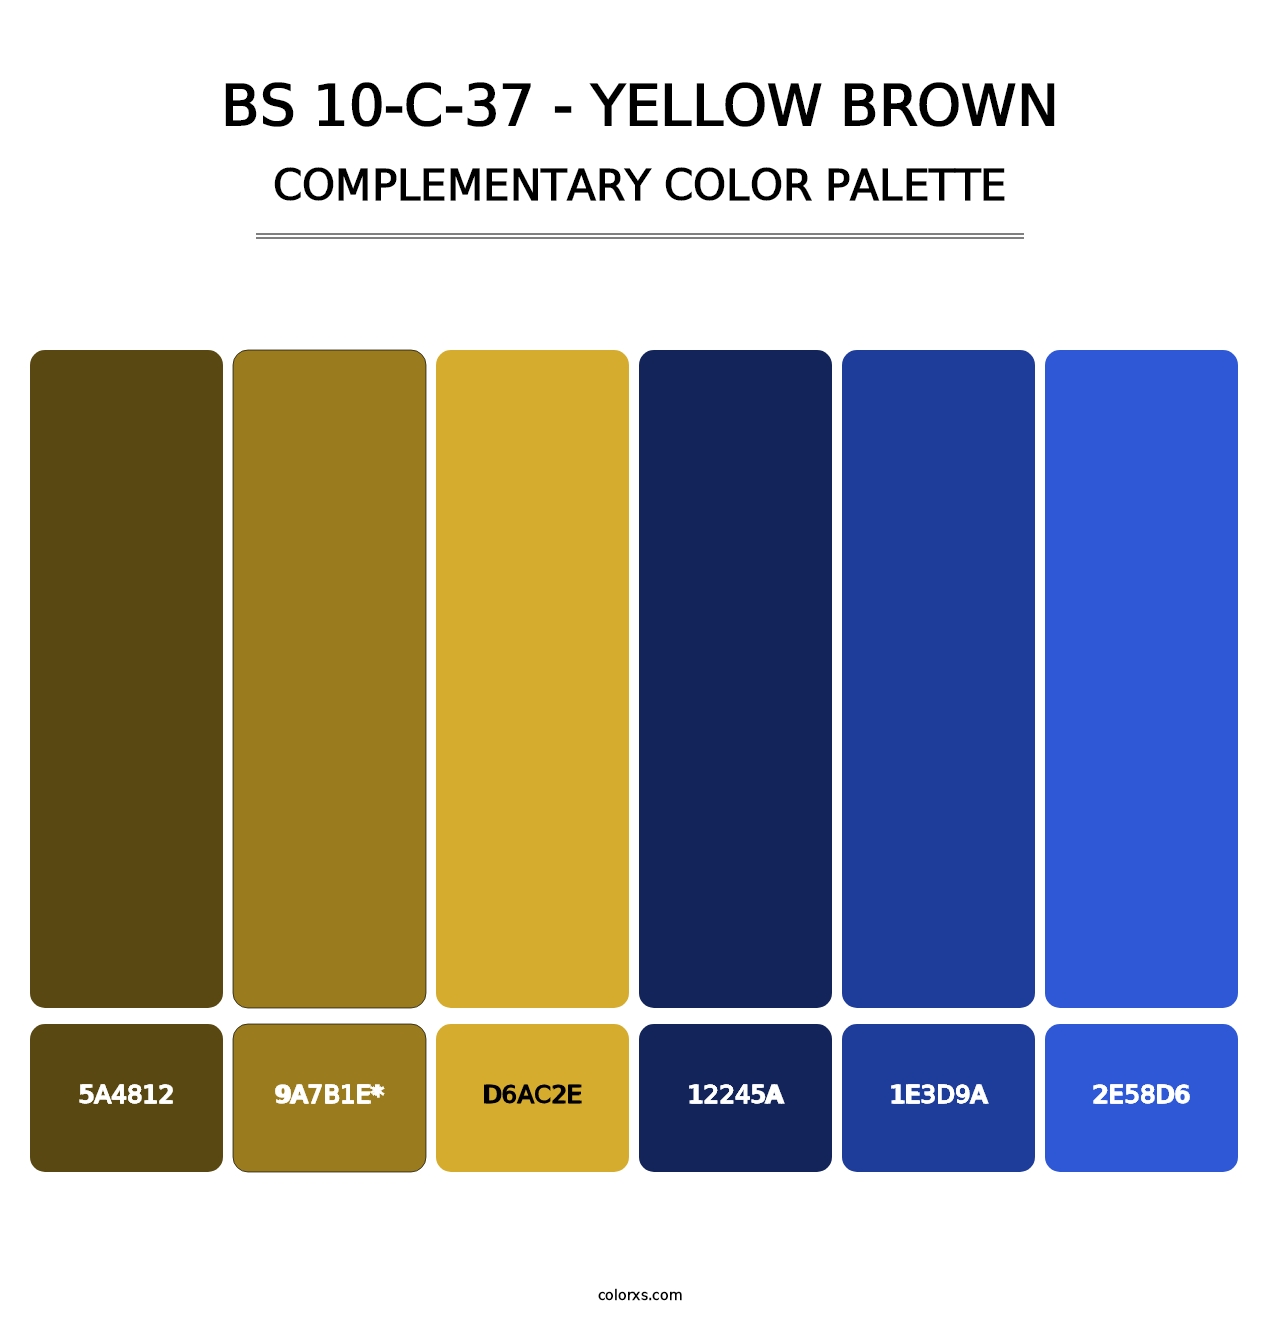 BS 10-C-37 - Yellow Brown - Complementary Color Palette